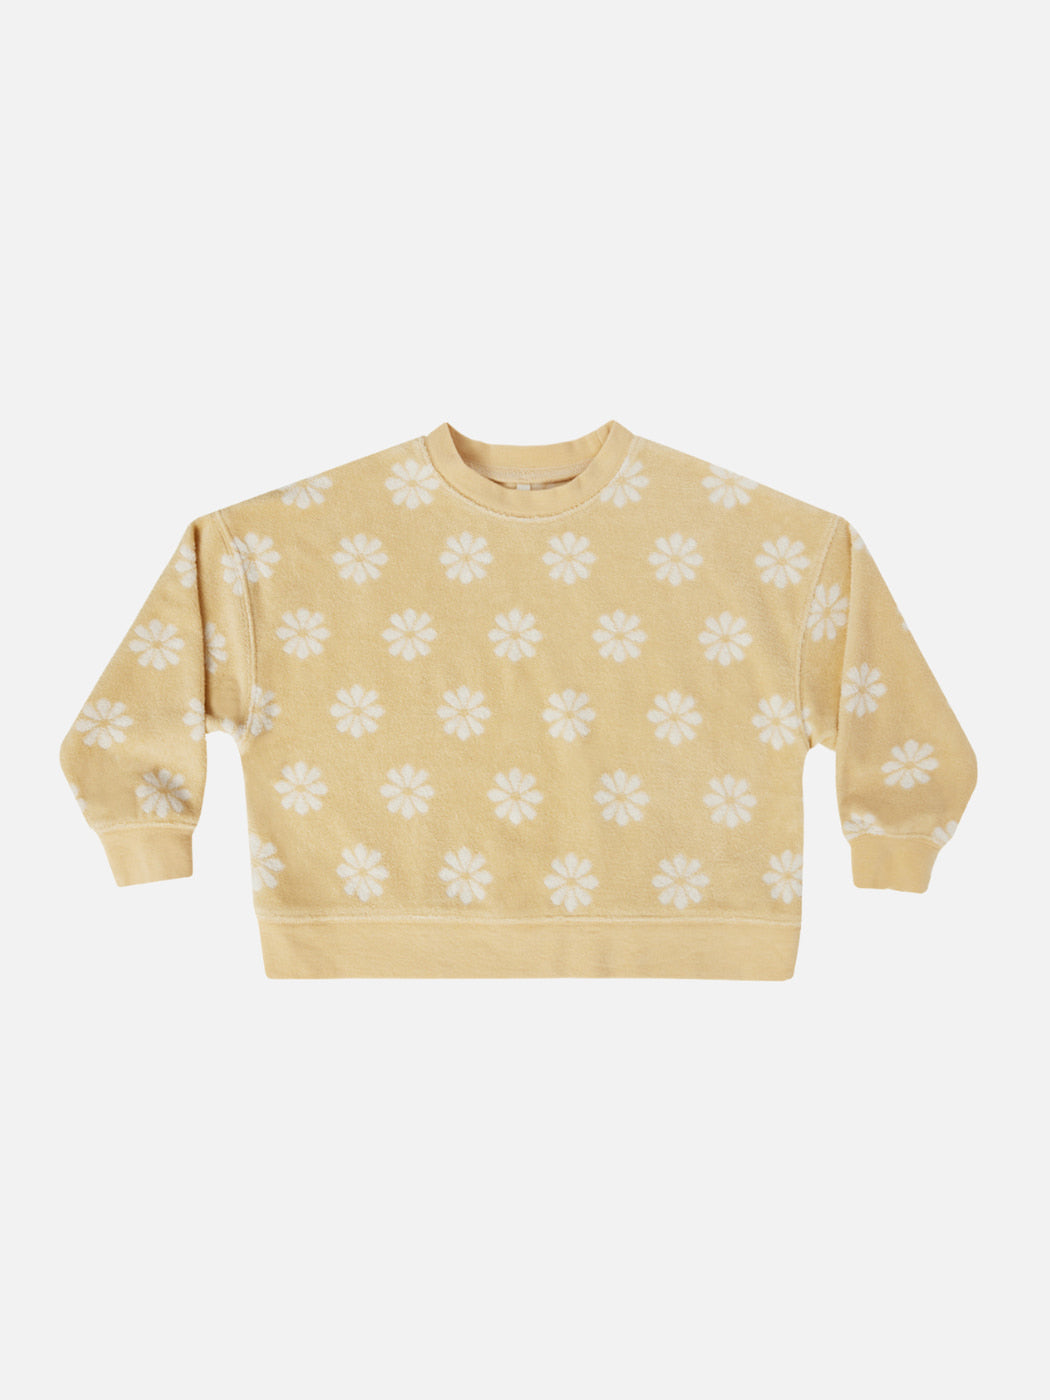 daisy jumper with yellow background and white flowers